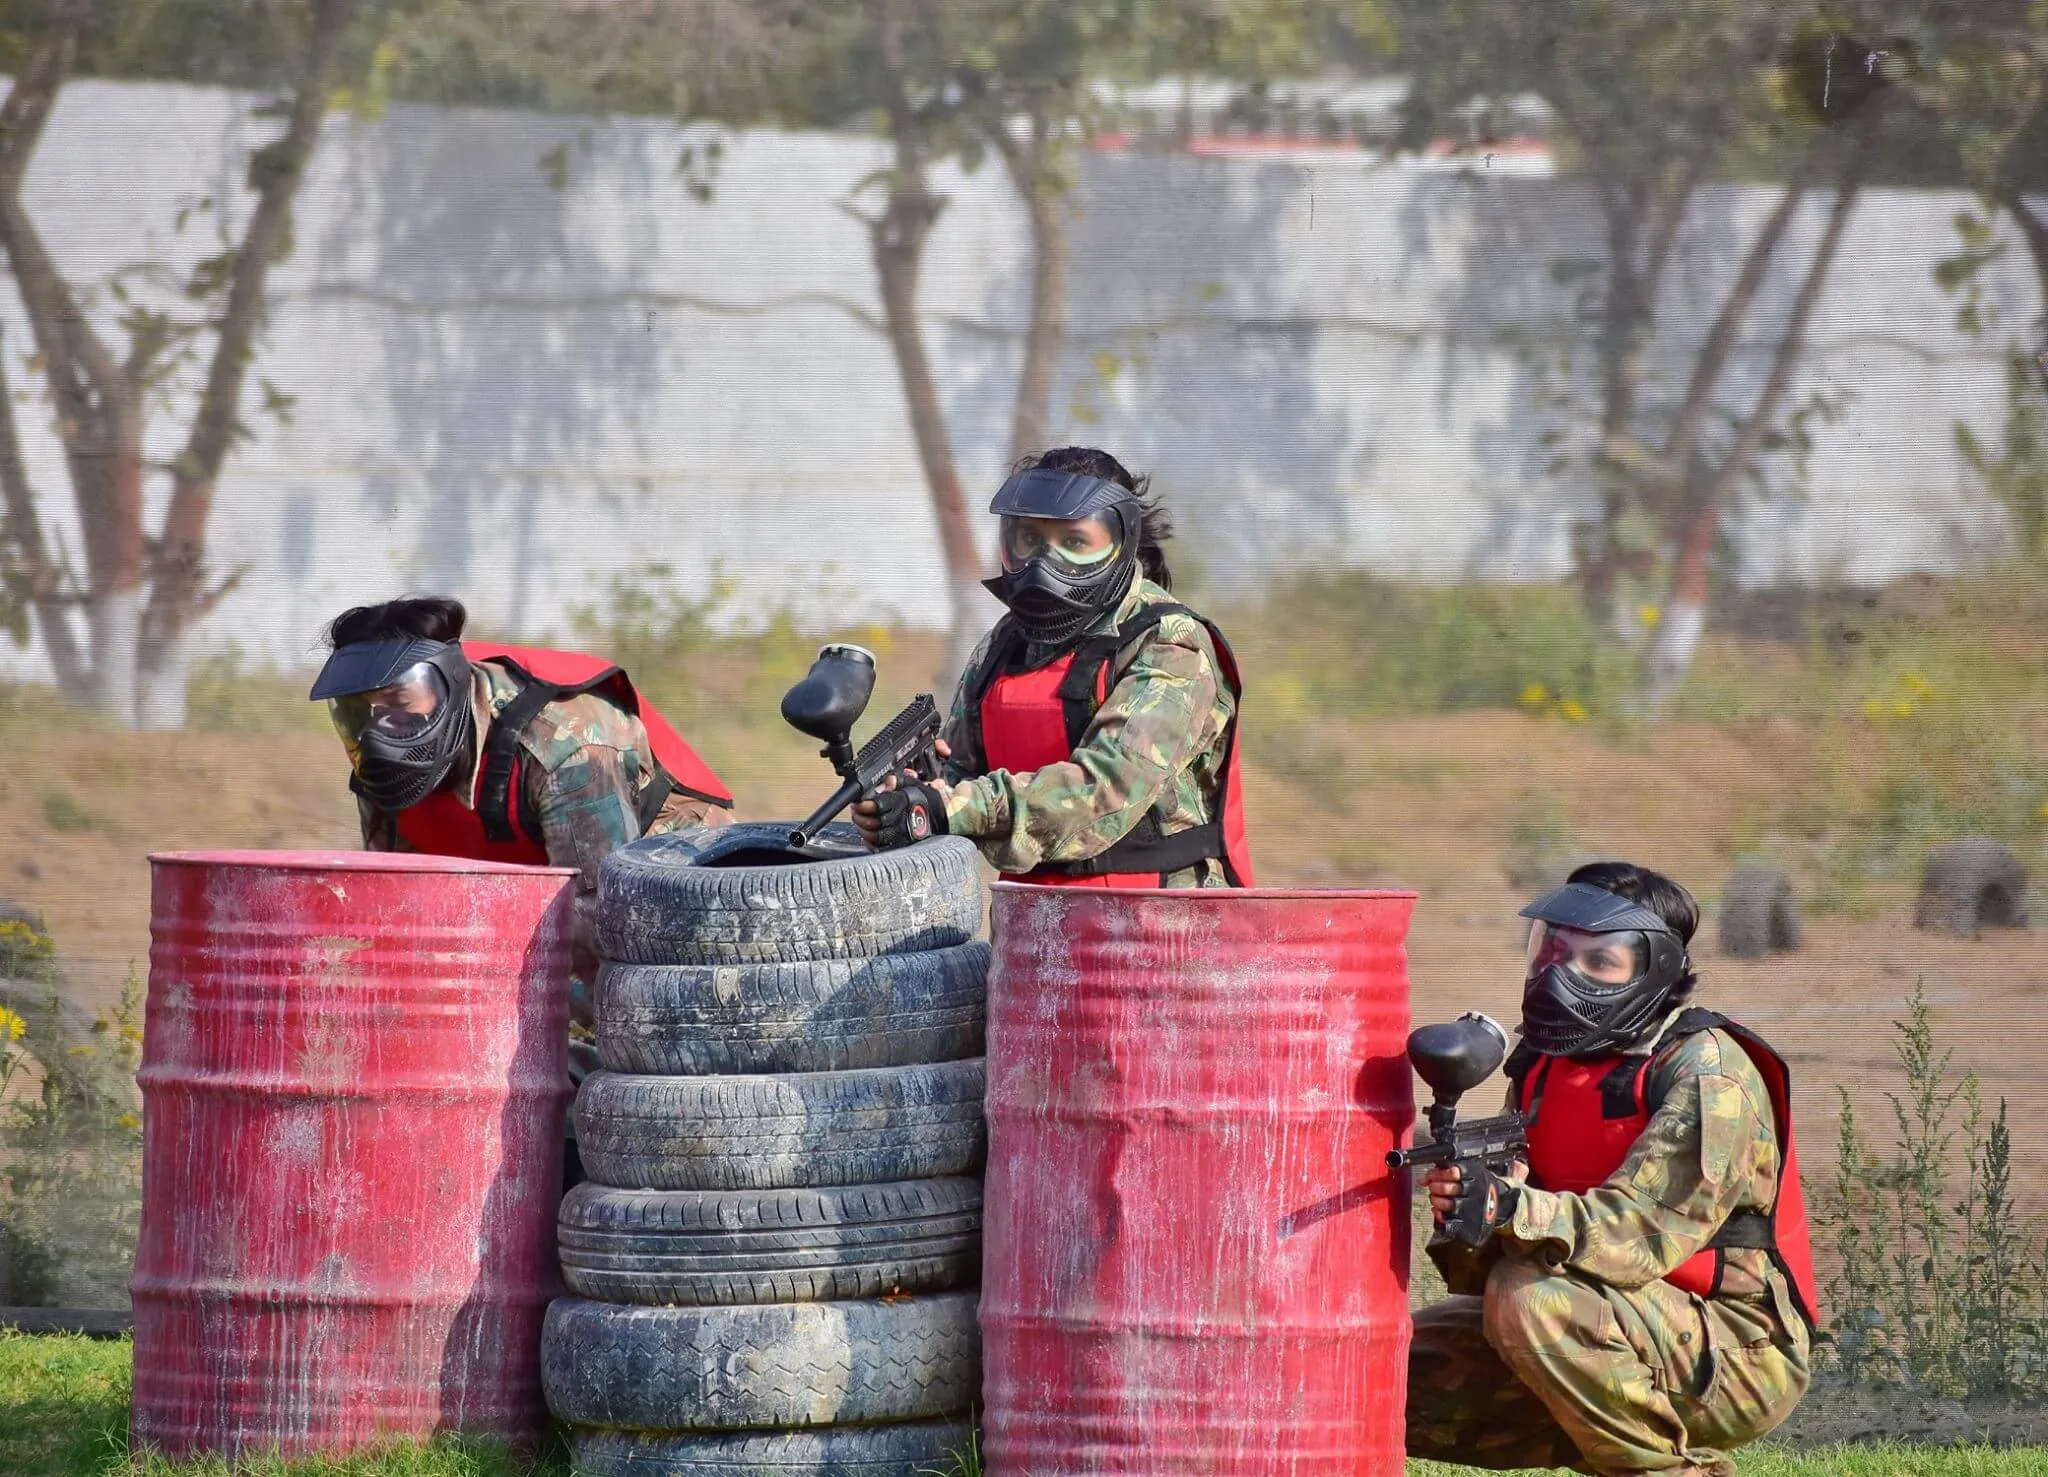 showcase of Paintball arena builders in India